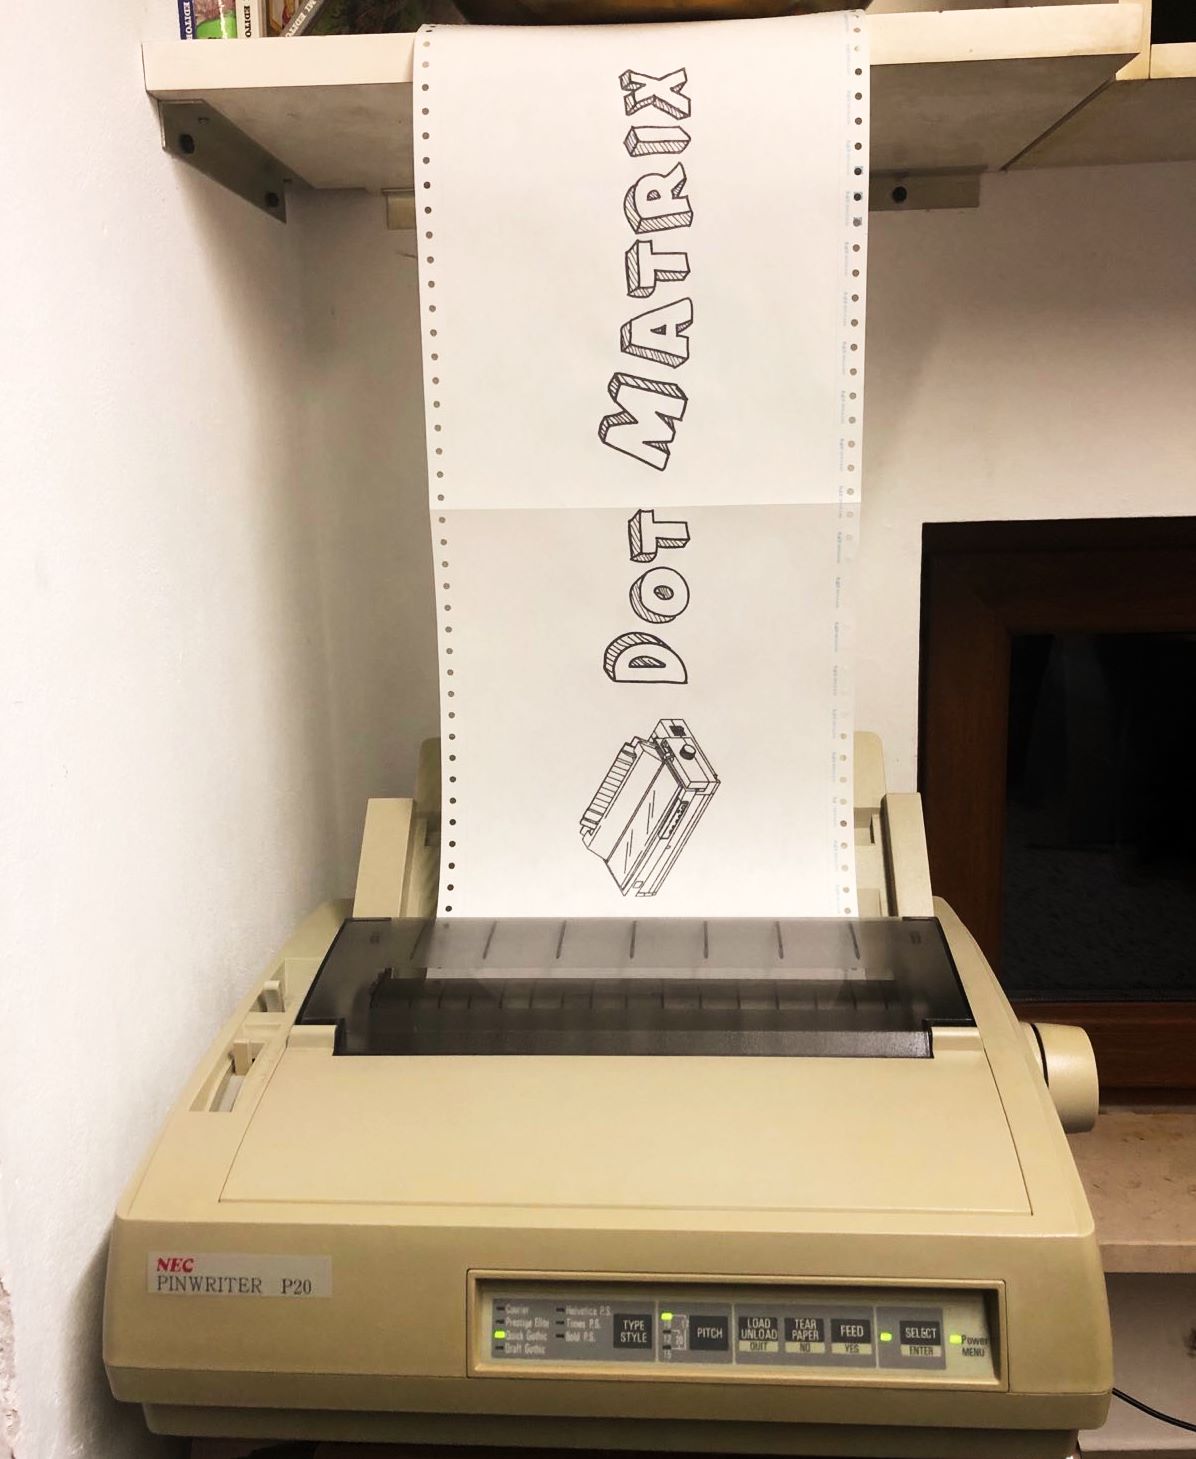 2-page banner printed on a NEC Pinwriter P20